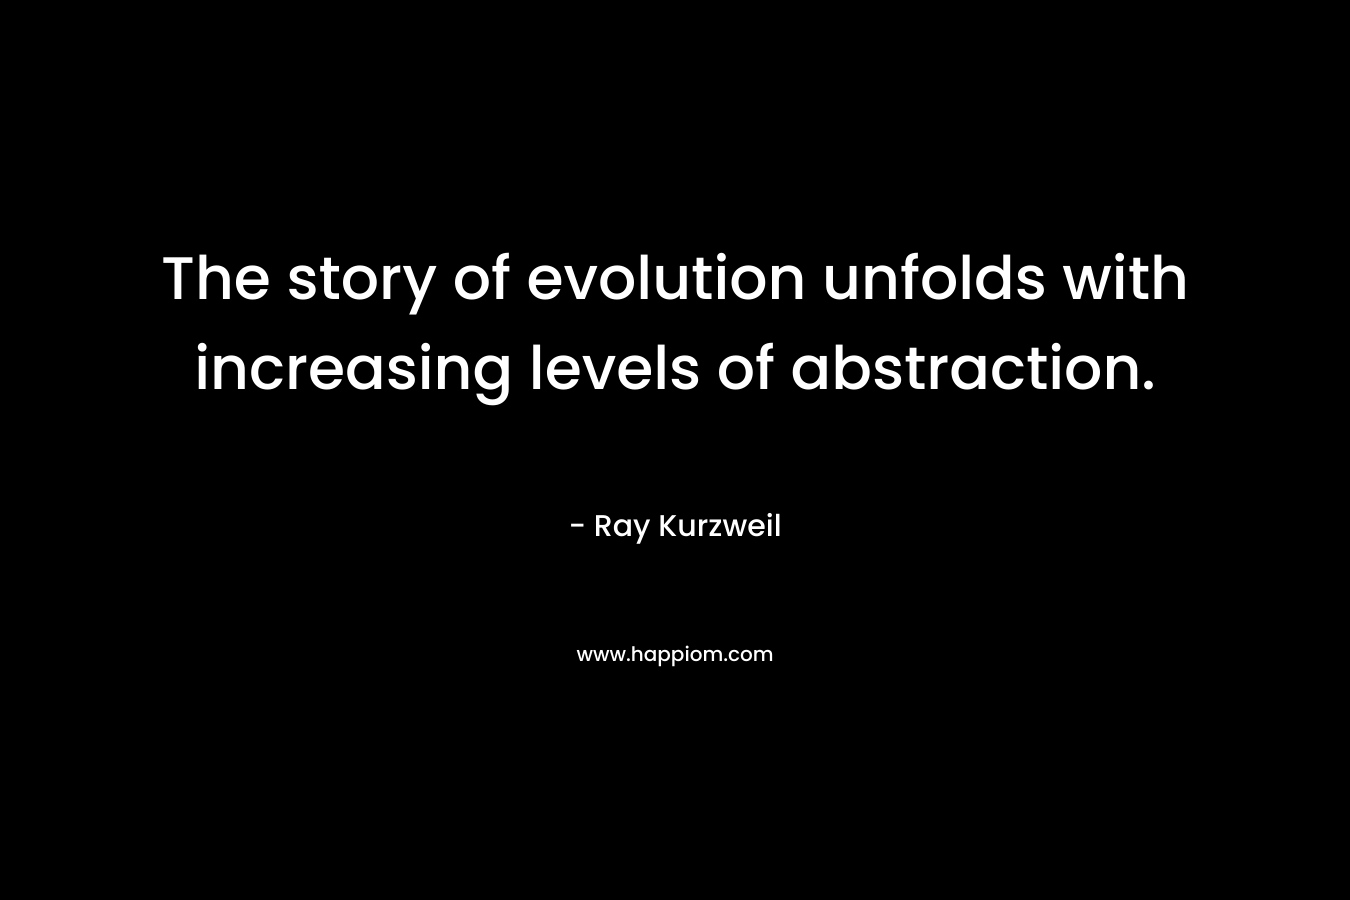 The story of evolution unfolds with increasing levels of abstraction. – Ray Kurzweil